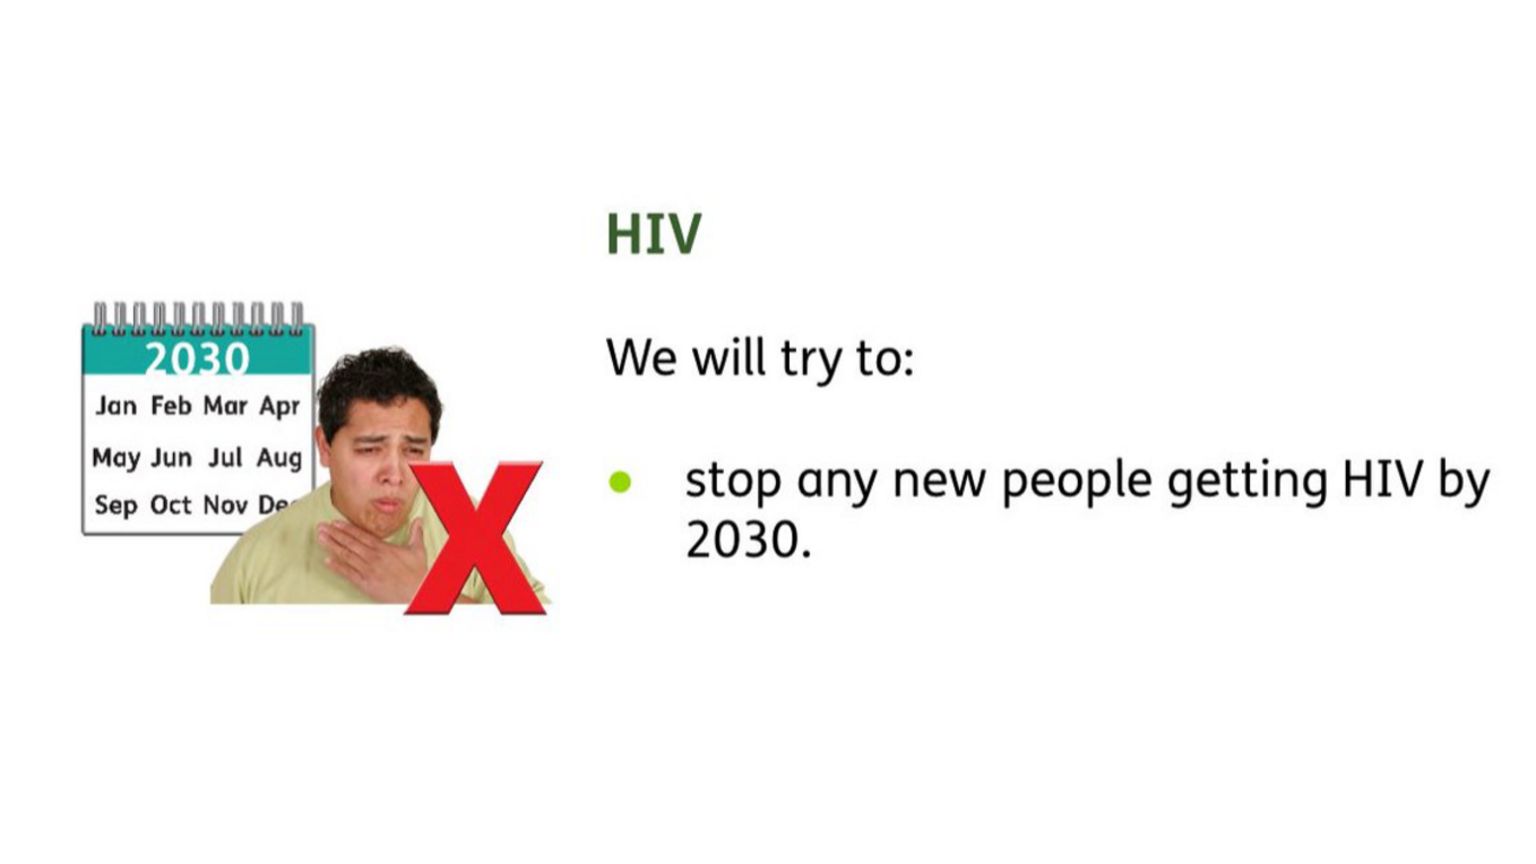 Screenshot of image removed from easy read online version of Green Party manifesto using an image of an ill man to illustrate its policy on HIV